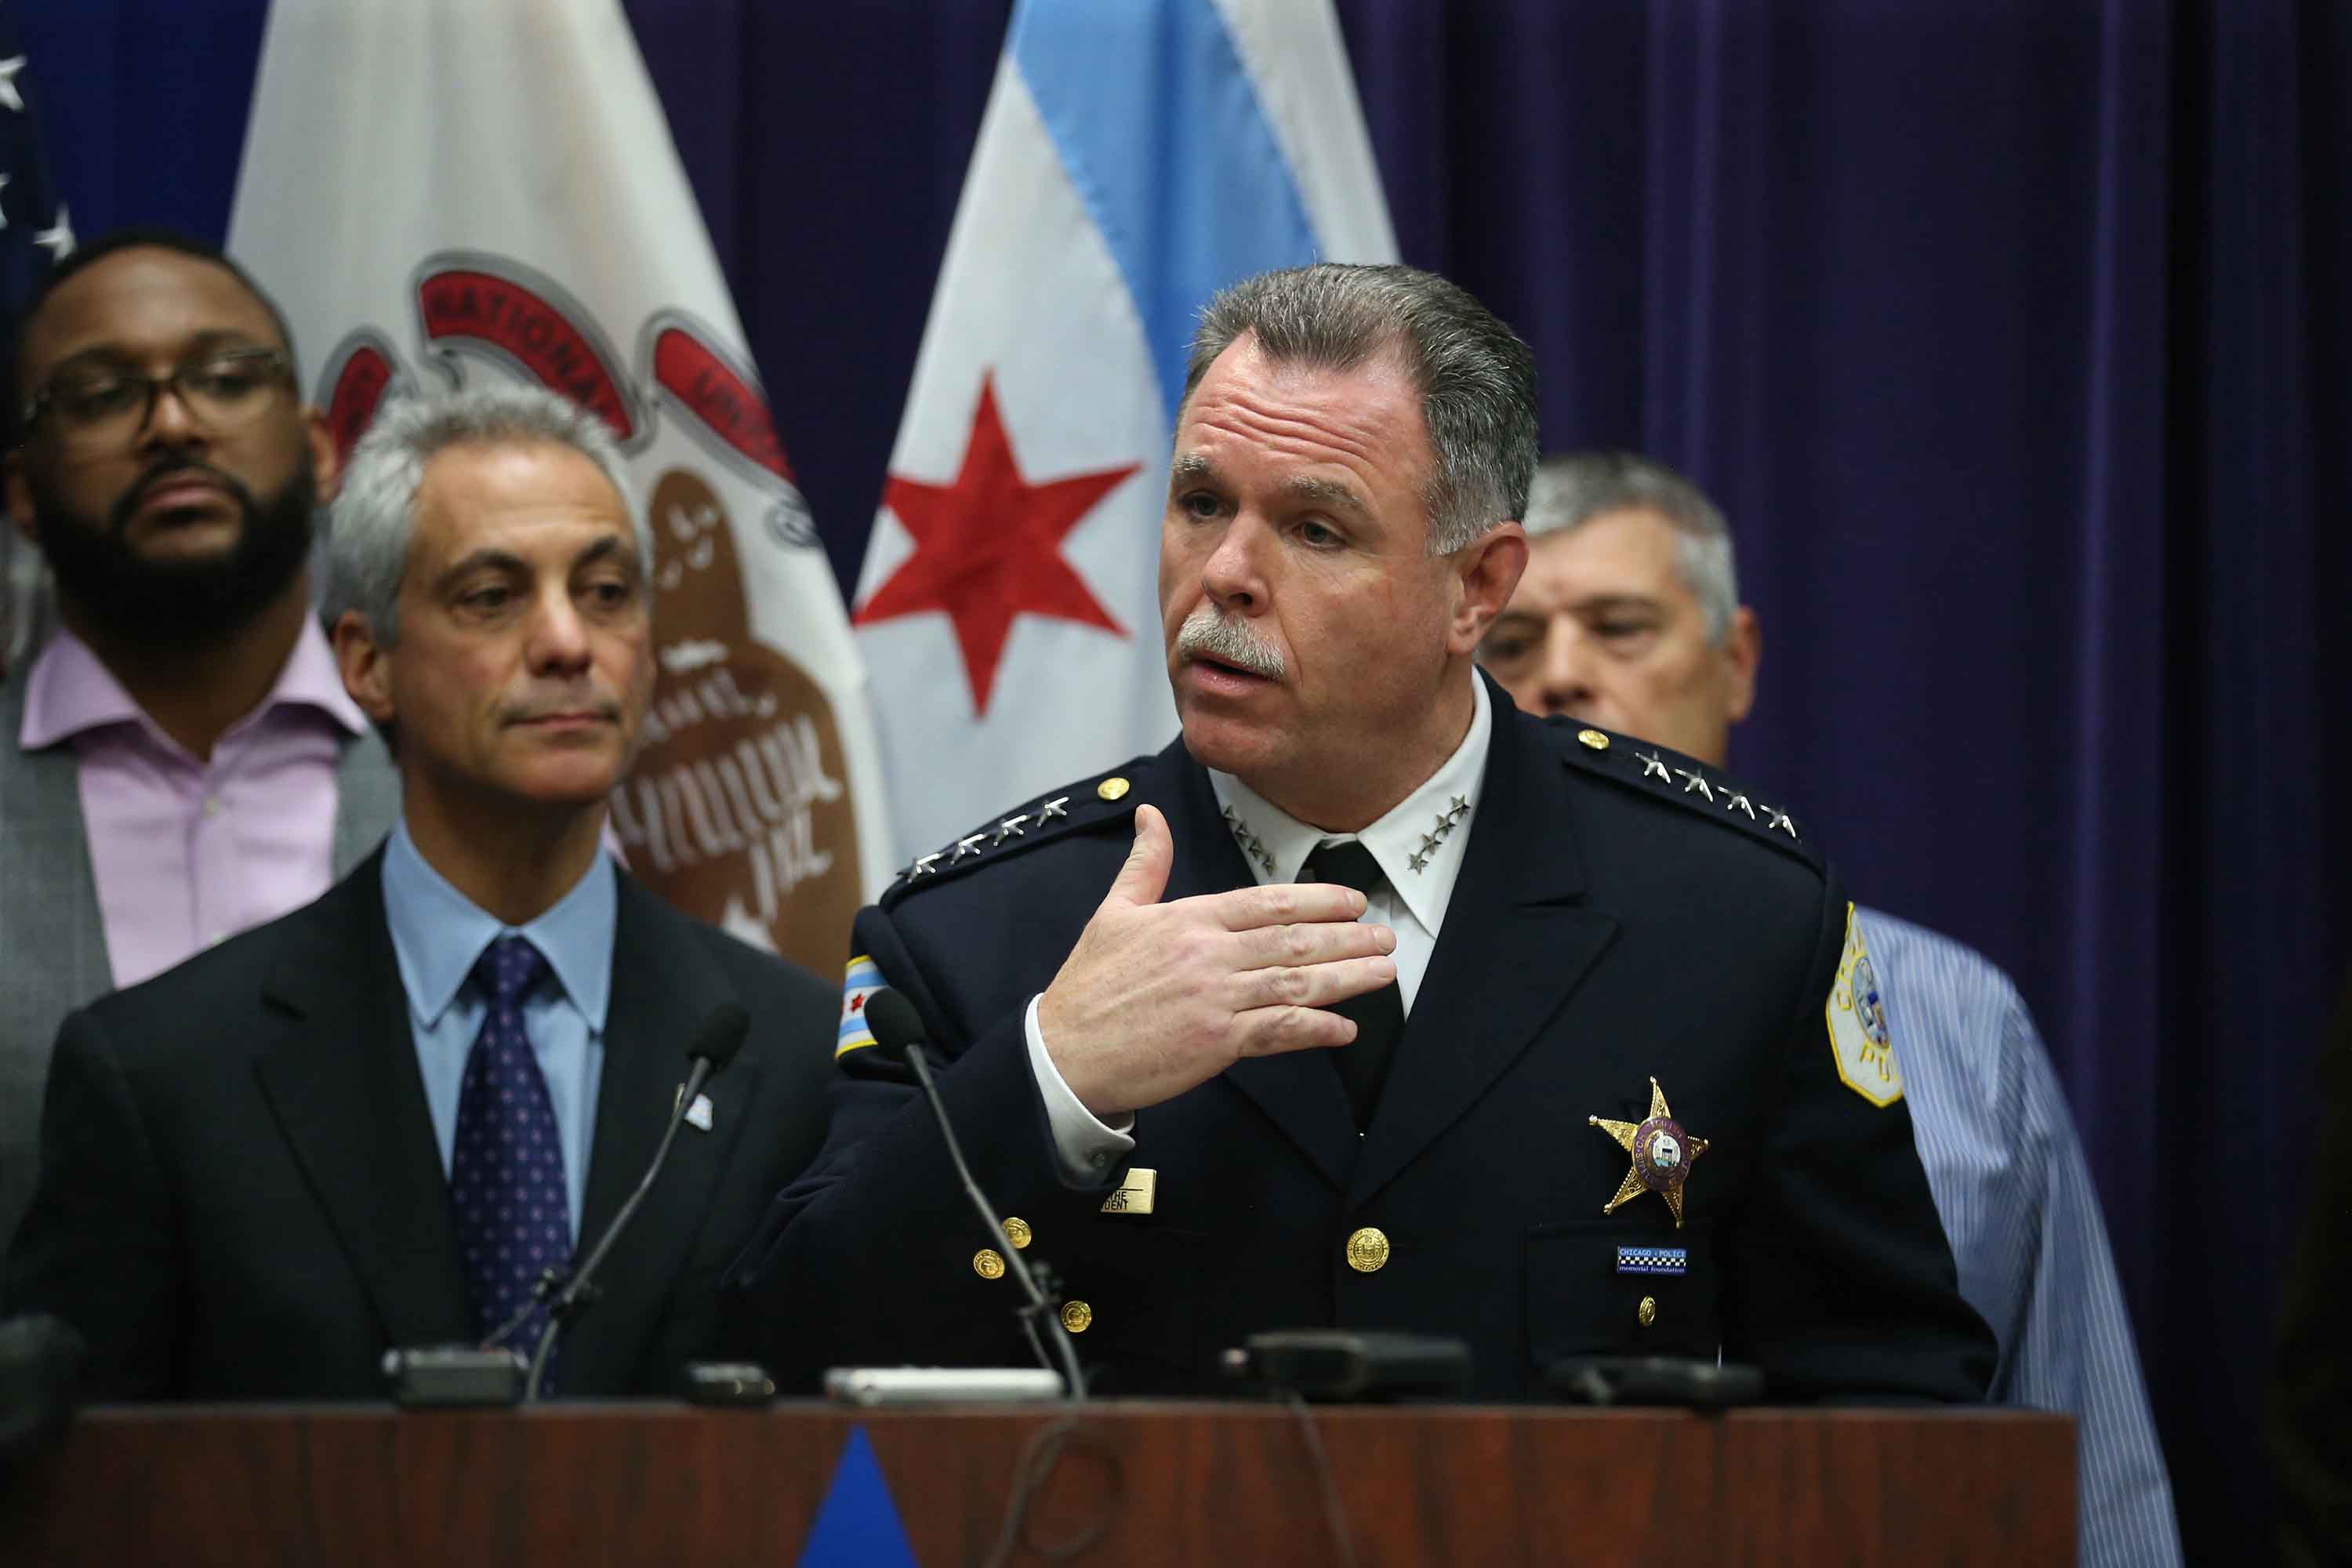 Mayor Rahm Emanuel and then-Chicago Police Supt. Garry McCarthy hold a news conference at Chicago Police Headquarters in Chicago on Tuesday, Nov. 24, 2015. Emanuel later dismissed McCarthy, citing a lack of public trust in police leadership in the wake of the Laquan McDonald shooting. (Nuccio DiNuzzo/Chicago Tribune/TNS)